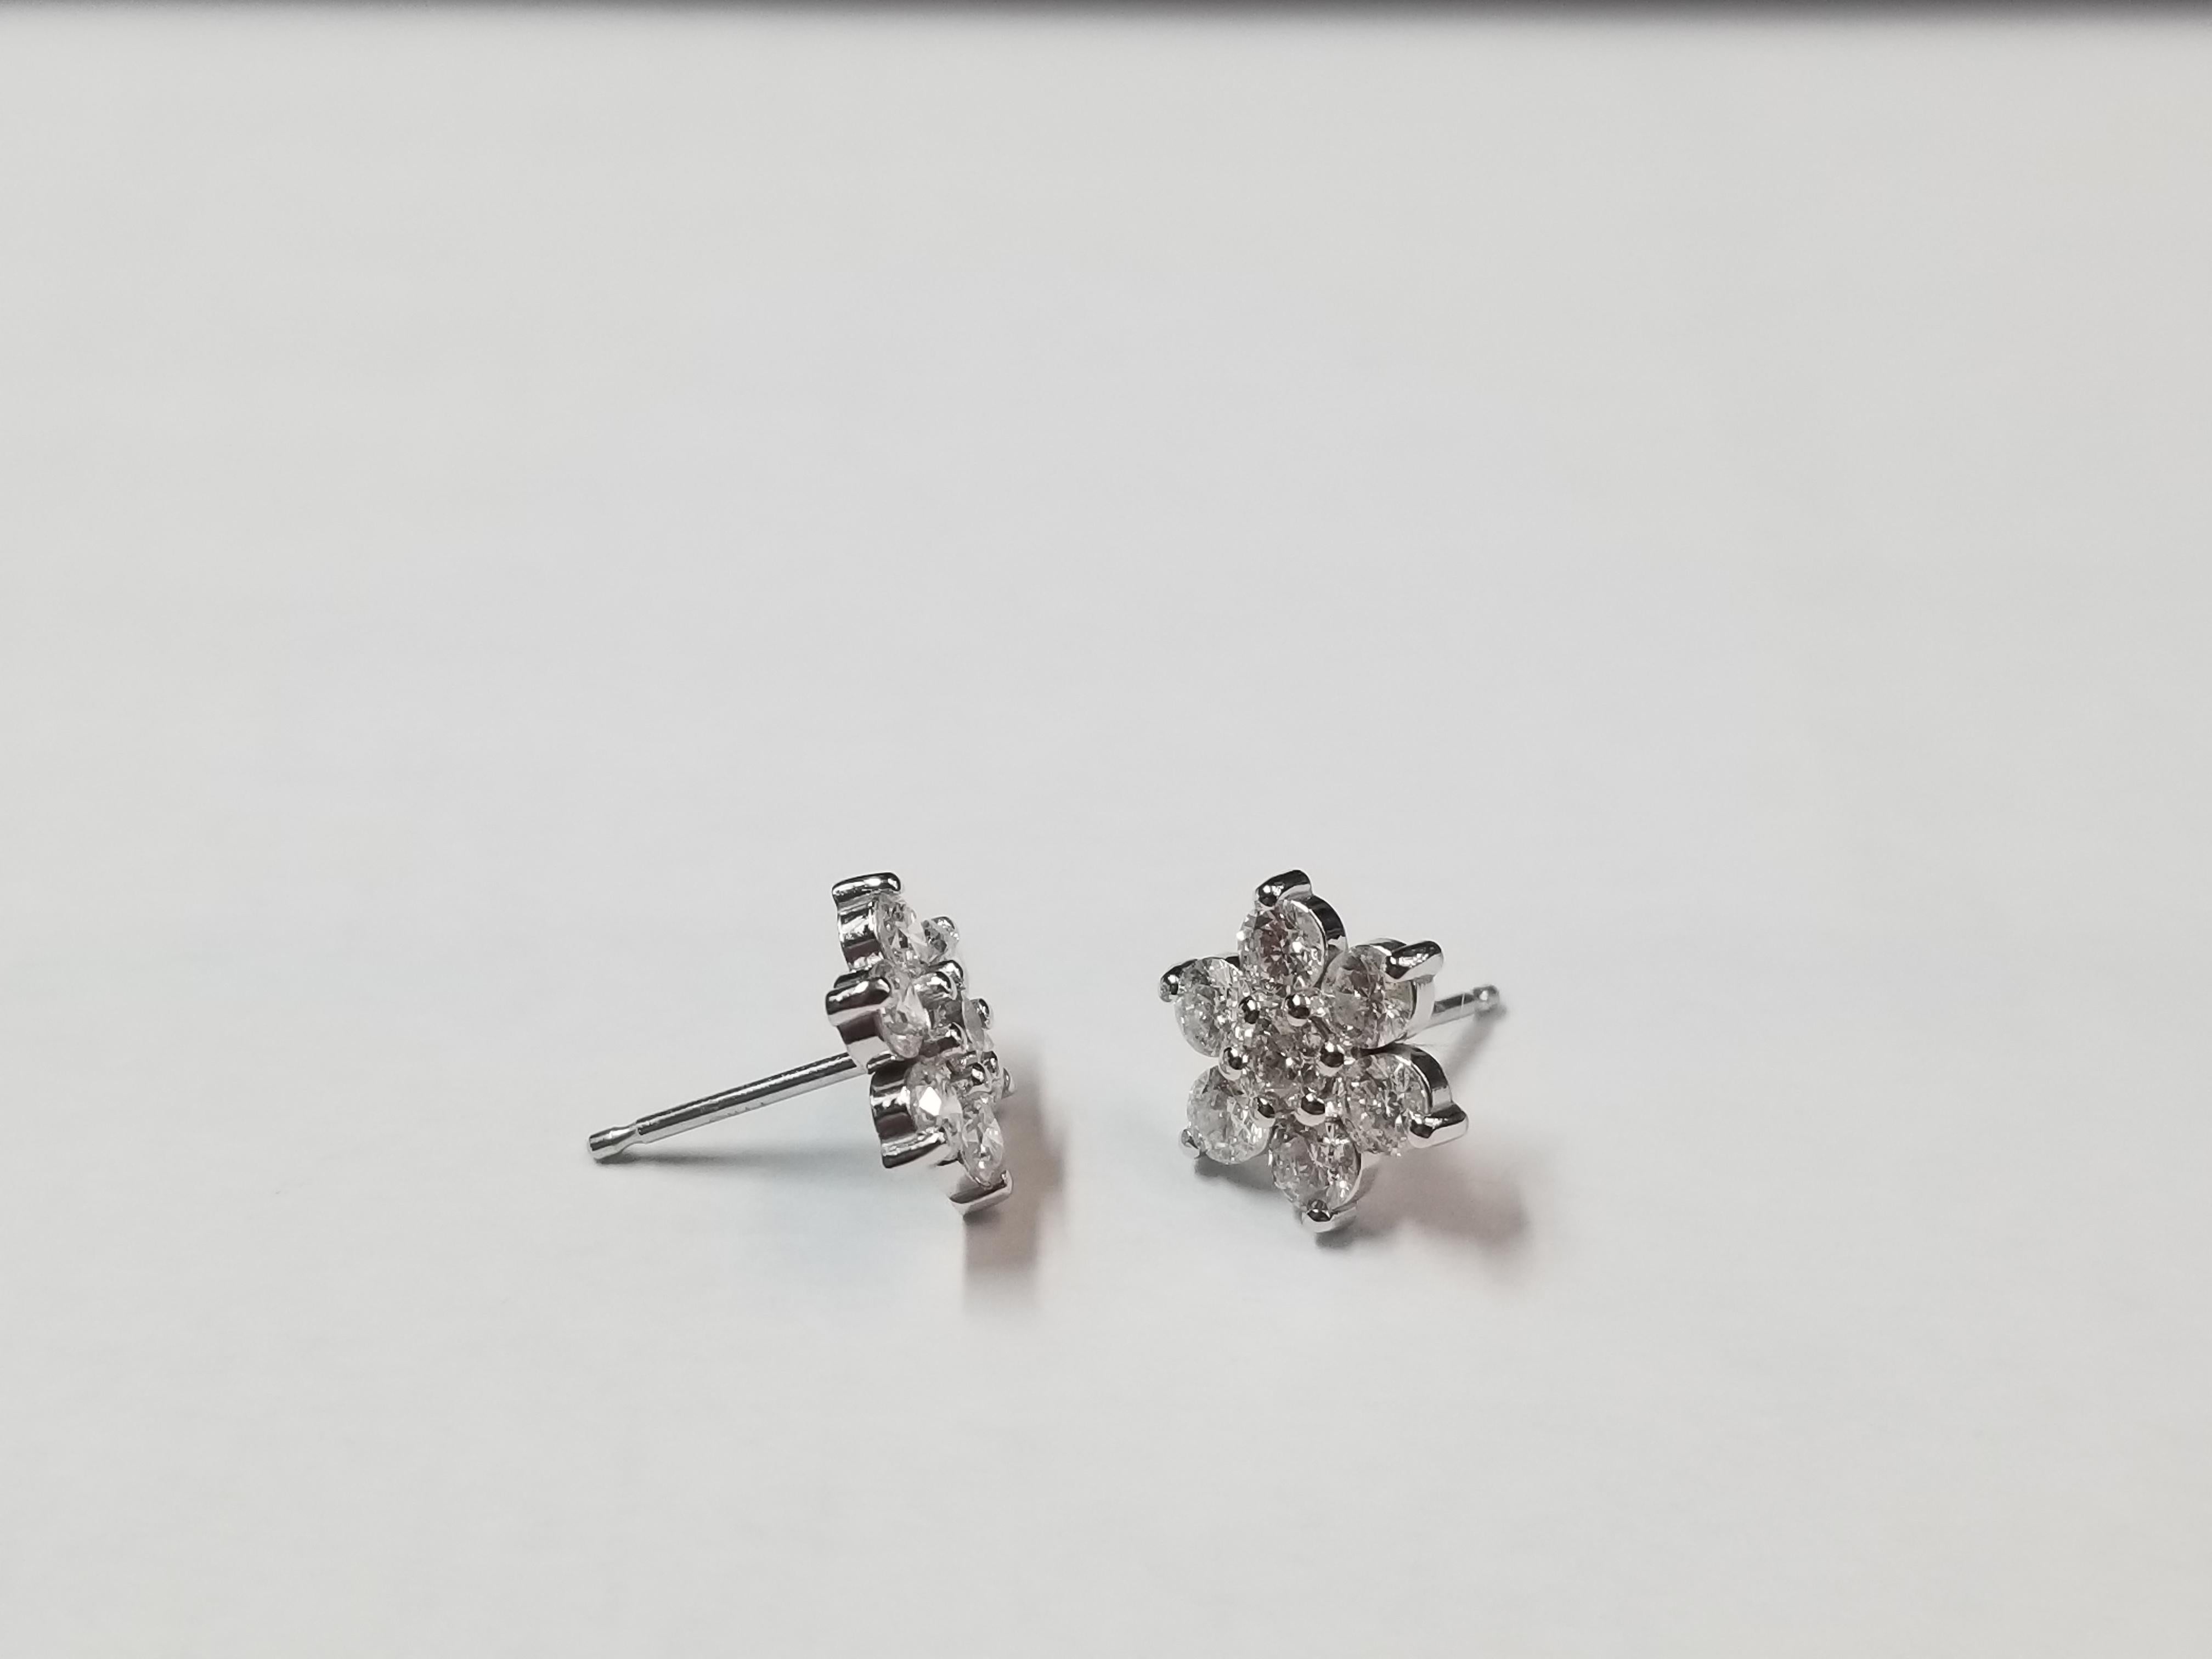 Delicate Flower Cluster Stud Earrings
The earrings are 14K White Gold
There are 1.05 Carats in Diamonds G I1
The studs measure 8.5mm wide.
the earrings weigh 1.37 grams